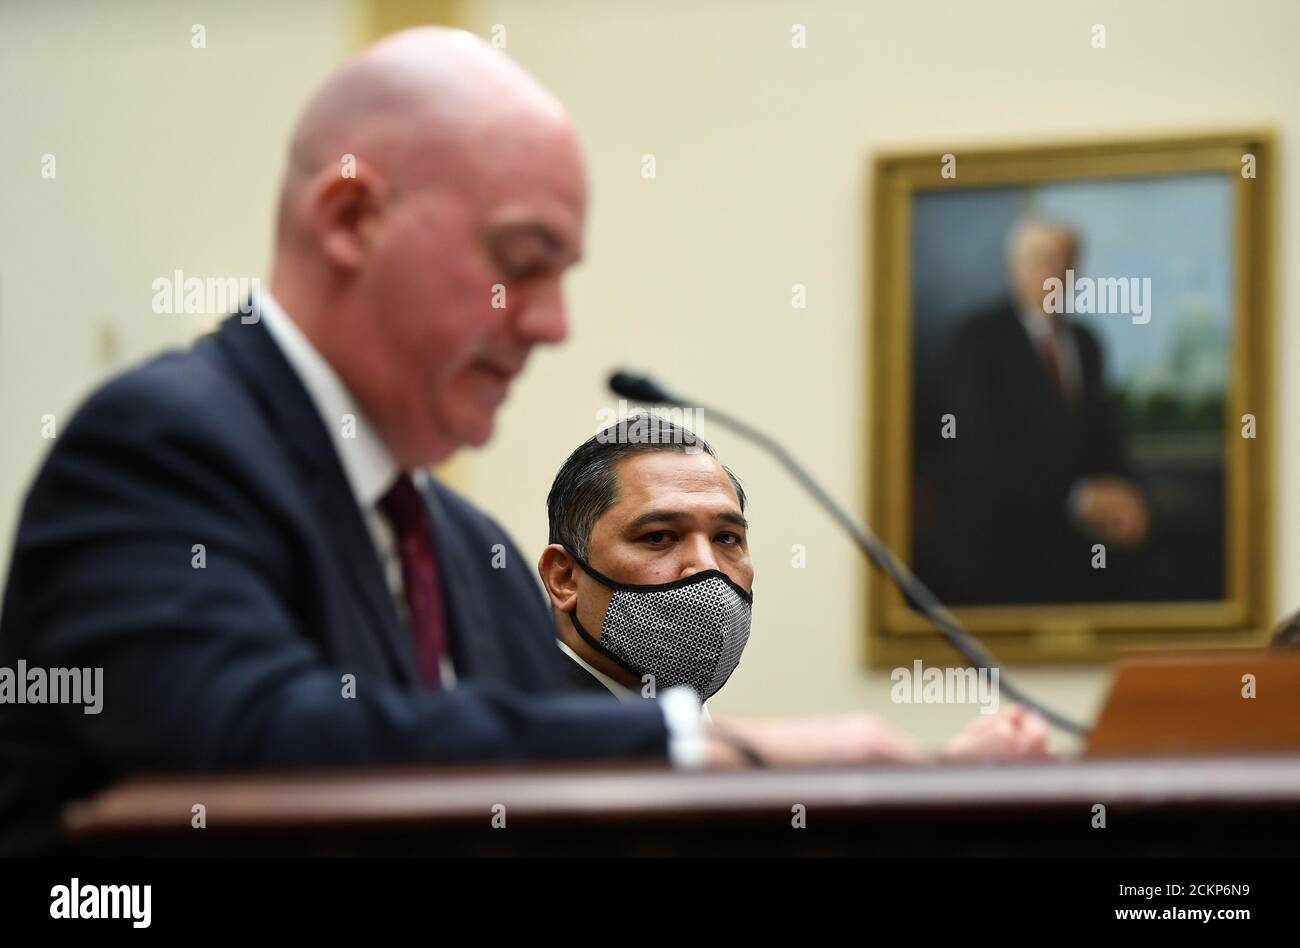 Washington, United States. 16th Sep, 2020. R. Clarke Cooper (L), Assistant Secretary of State for Political-Military Affairs and Brian Bulatao, Under Secretary of State for Management, testify before a House Committee on Foreign Affairs hearing looking into the firing of State Department Inspector General Steven Linick, on Capitol Hill in Washington, DC on Wednesday, September 16, 2020. Photo by Kevin Dietsch/UPI Credit: UPI/Alamy Live News Stock Photo